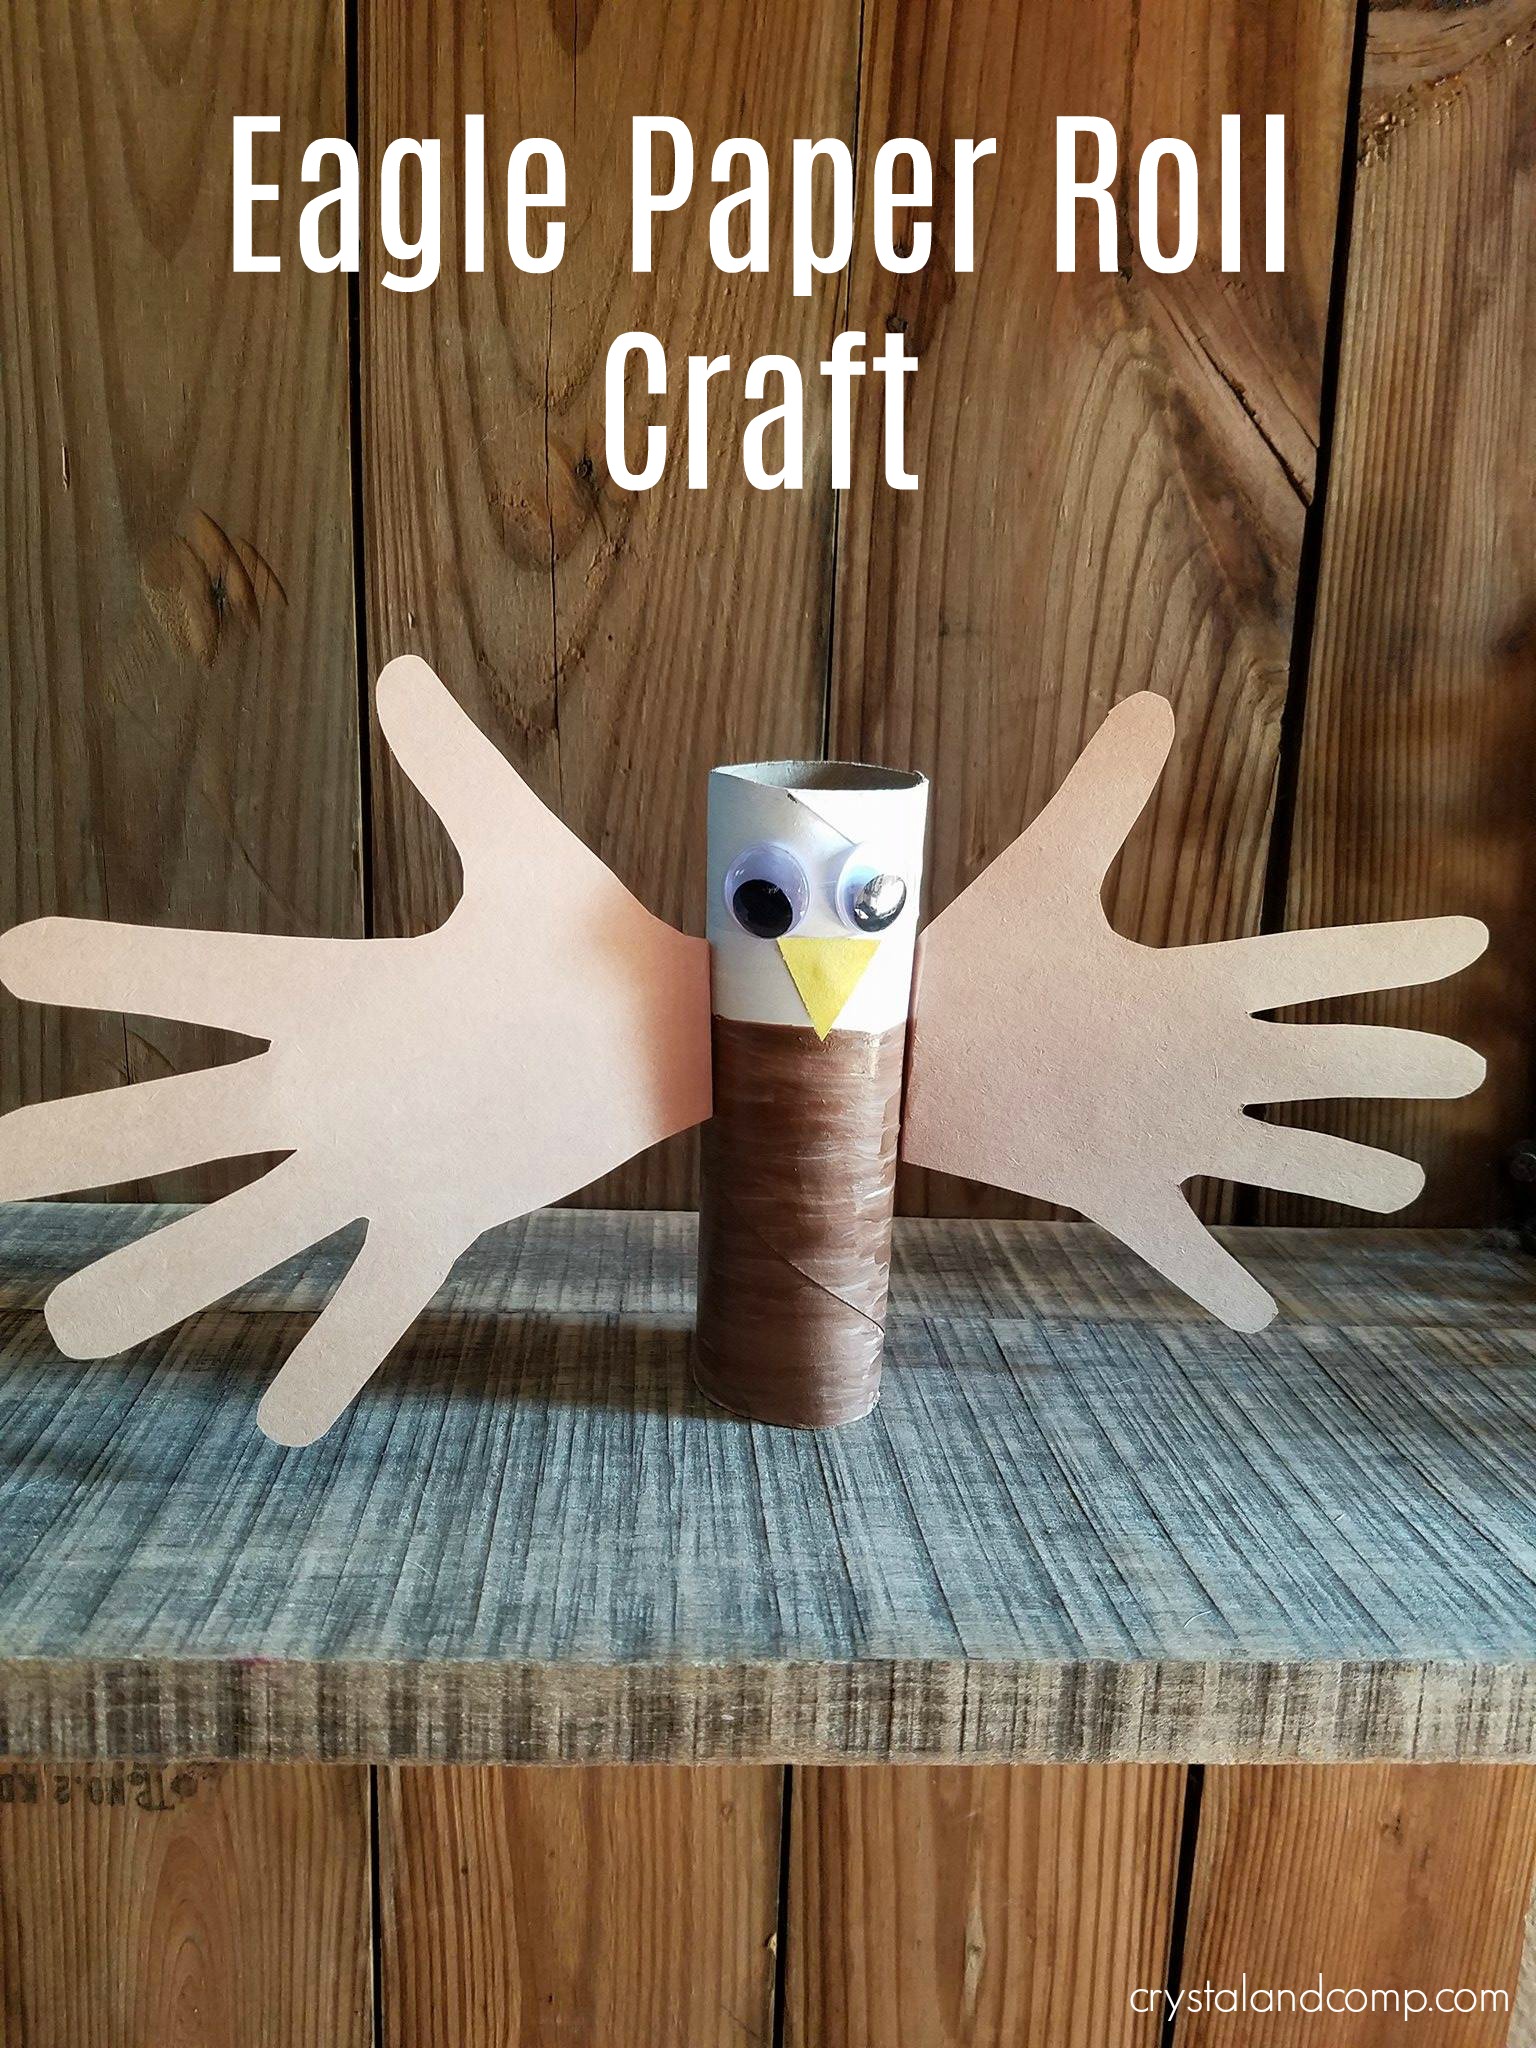 Eagle Paper Roll Craft for Preschoolers